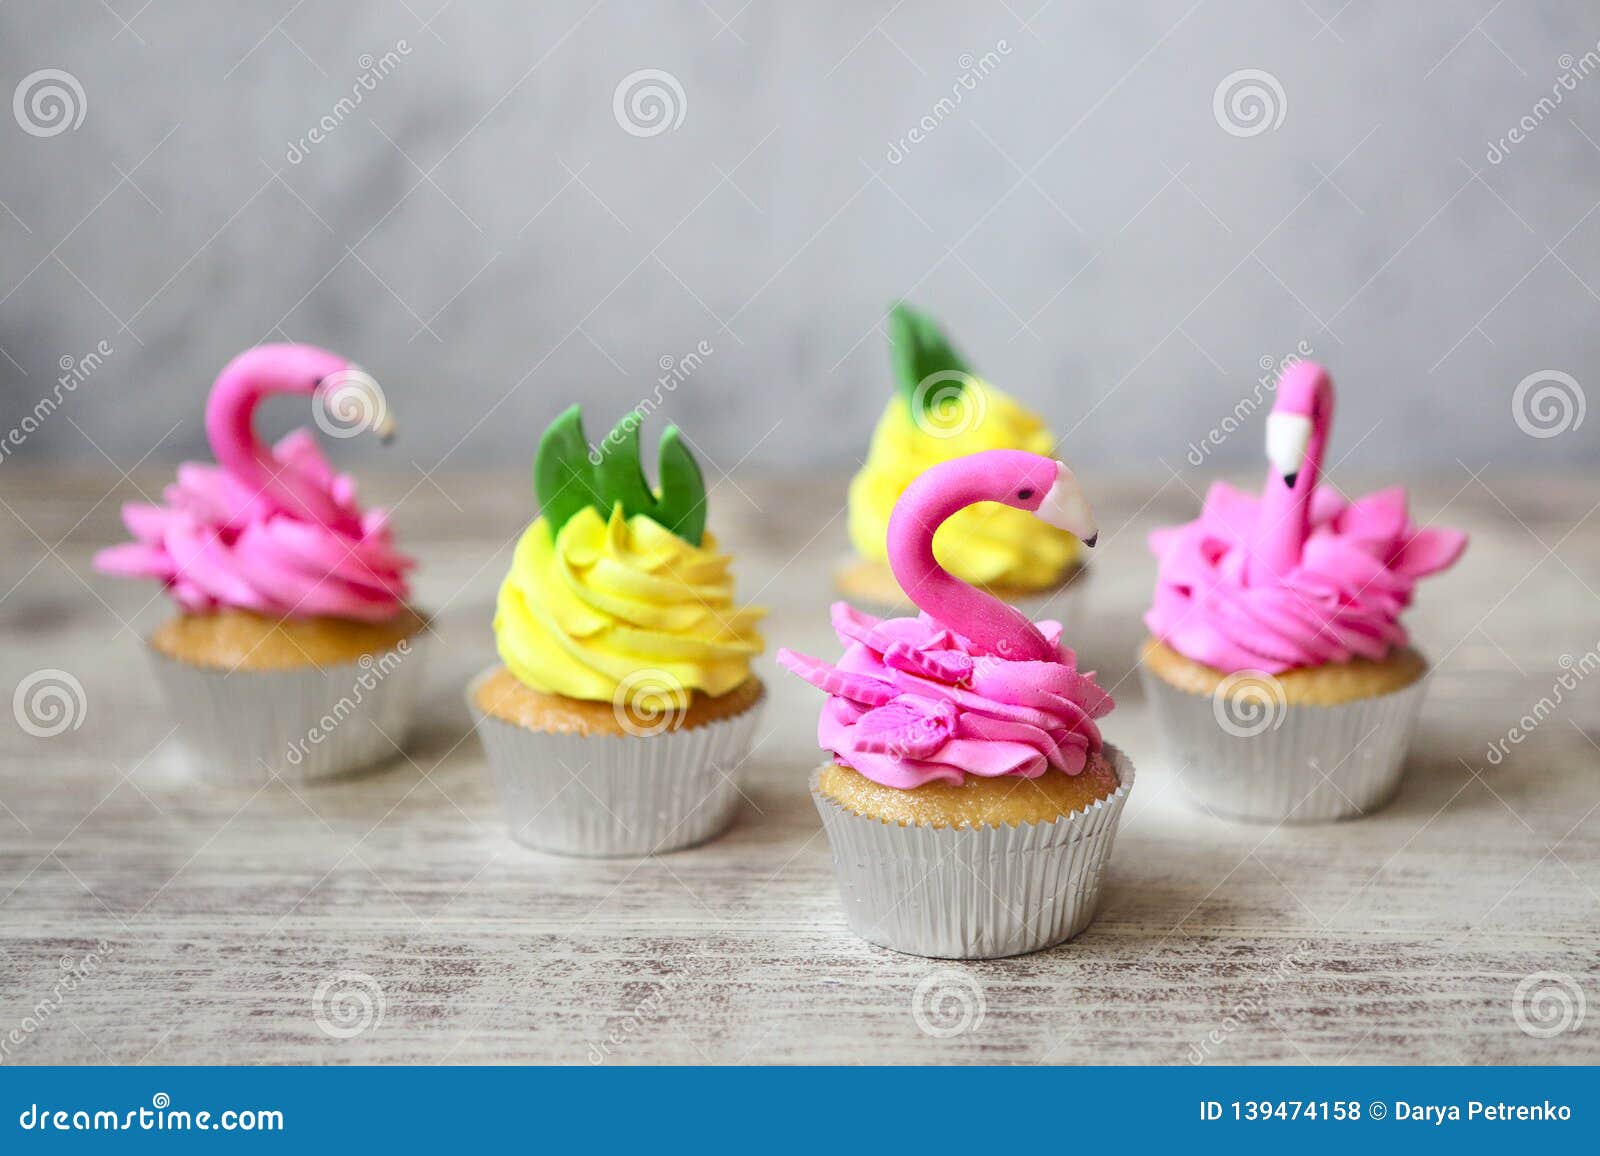 Pink Flamingo And Pineapple Cupcakes For The Birthday Party Stock